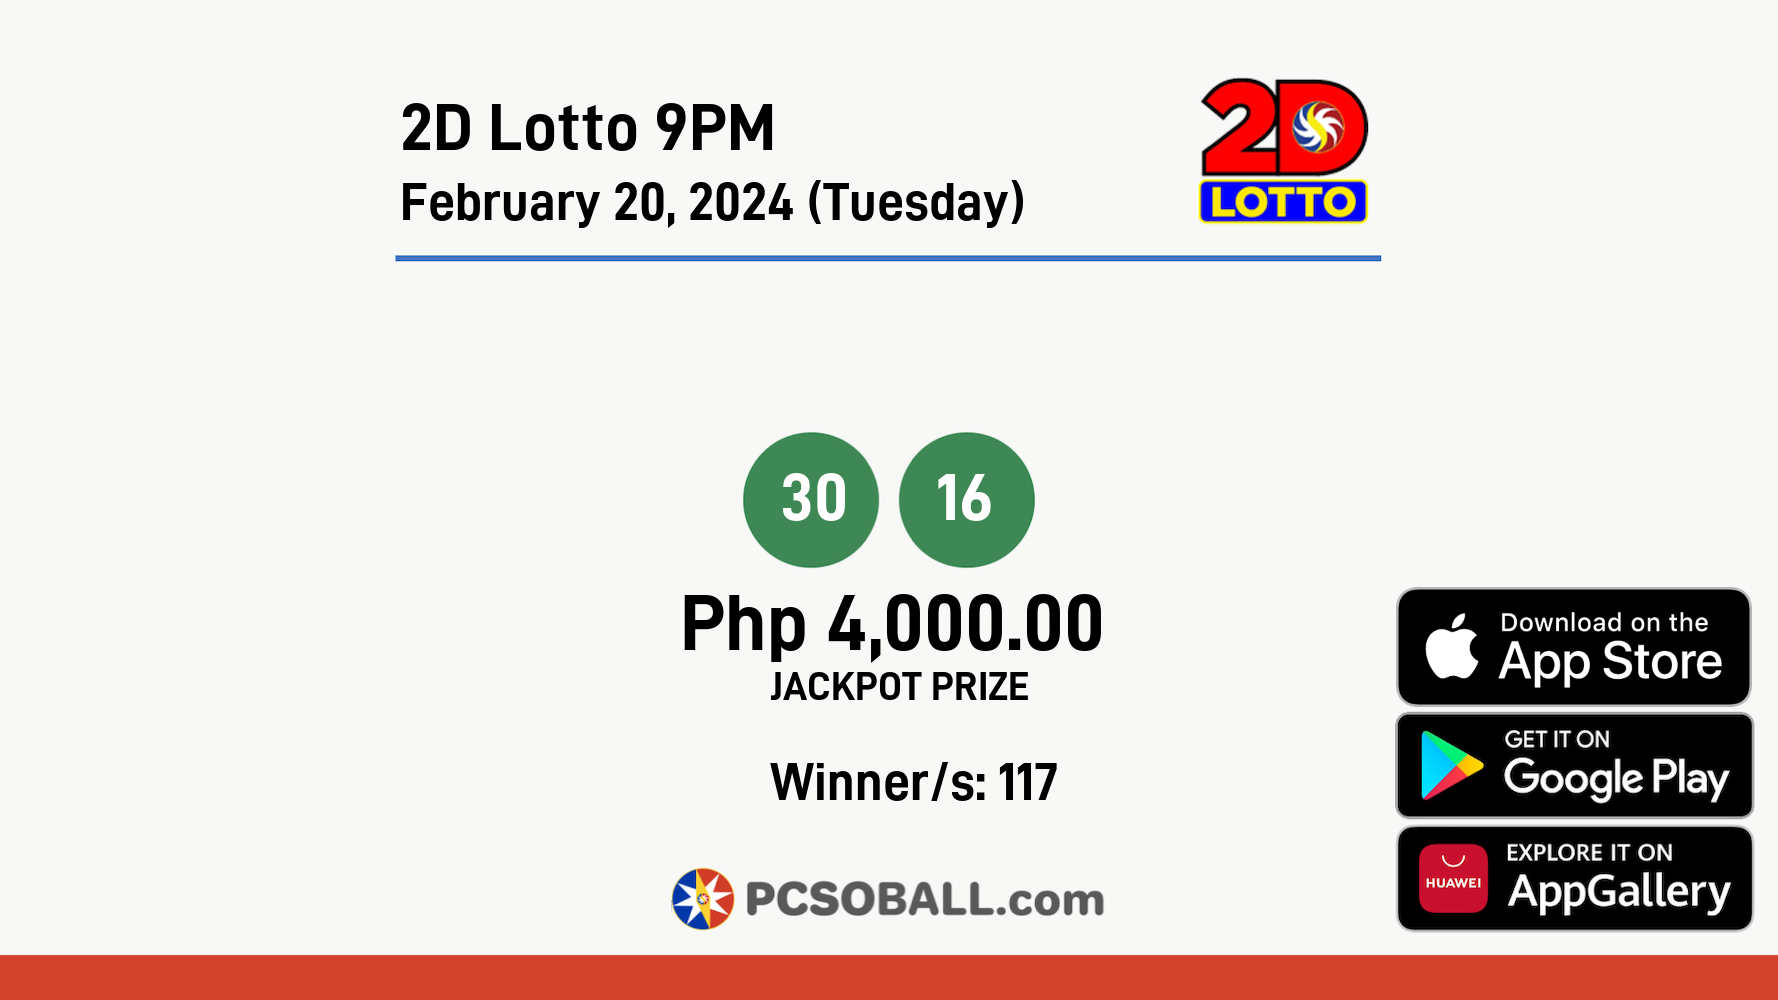 2D Lotto 9PM February 20, 2024 (Tuesday) Result